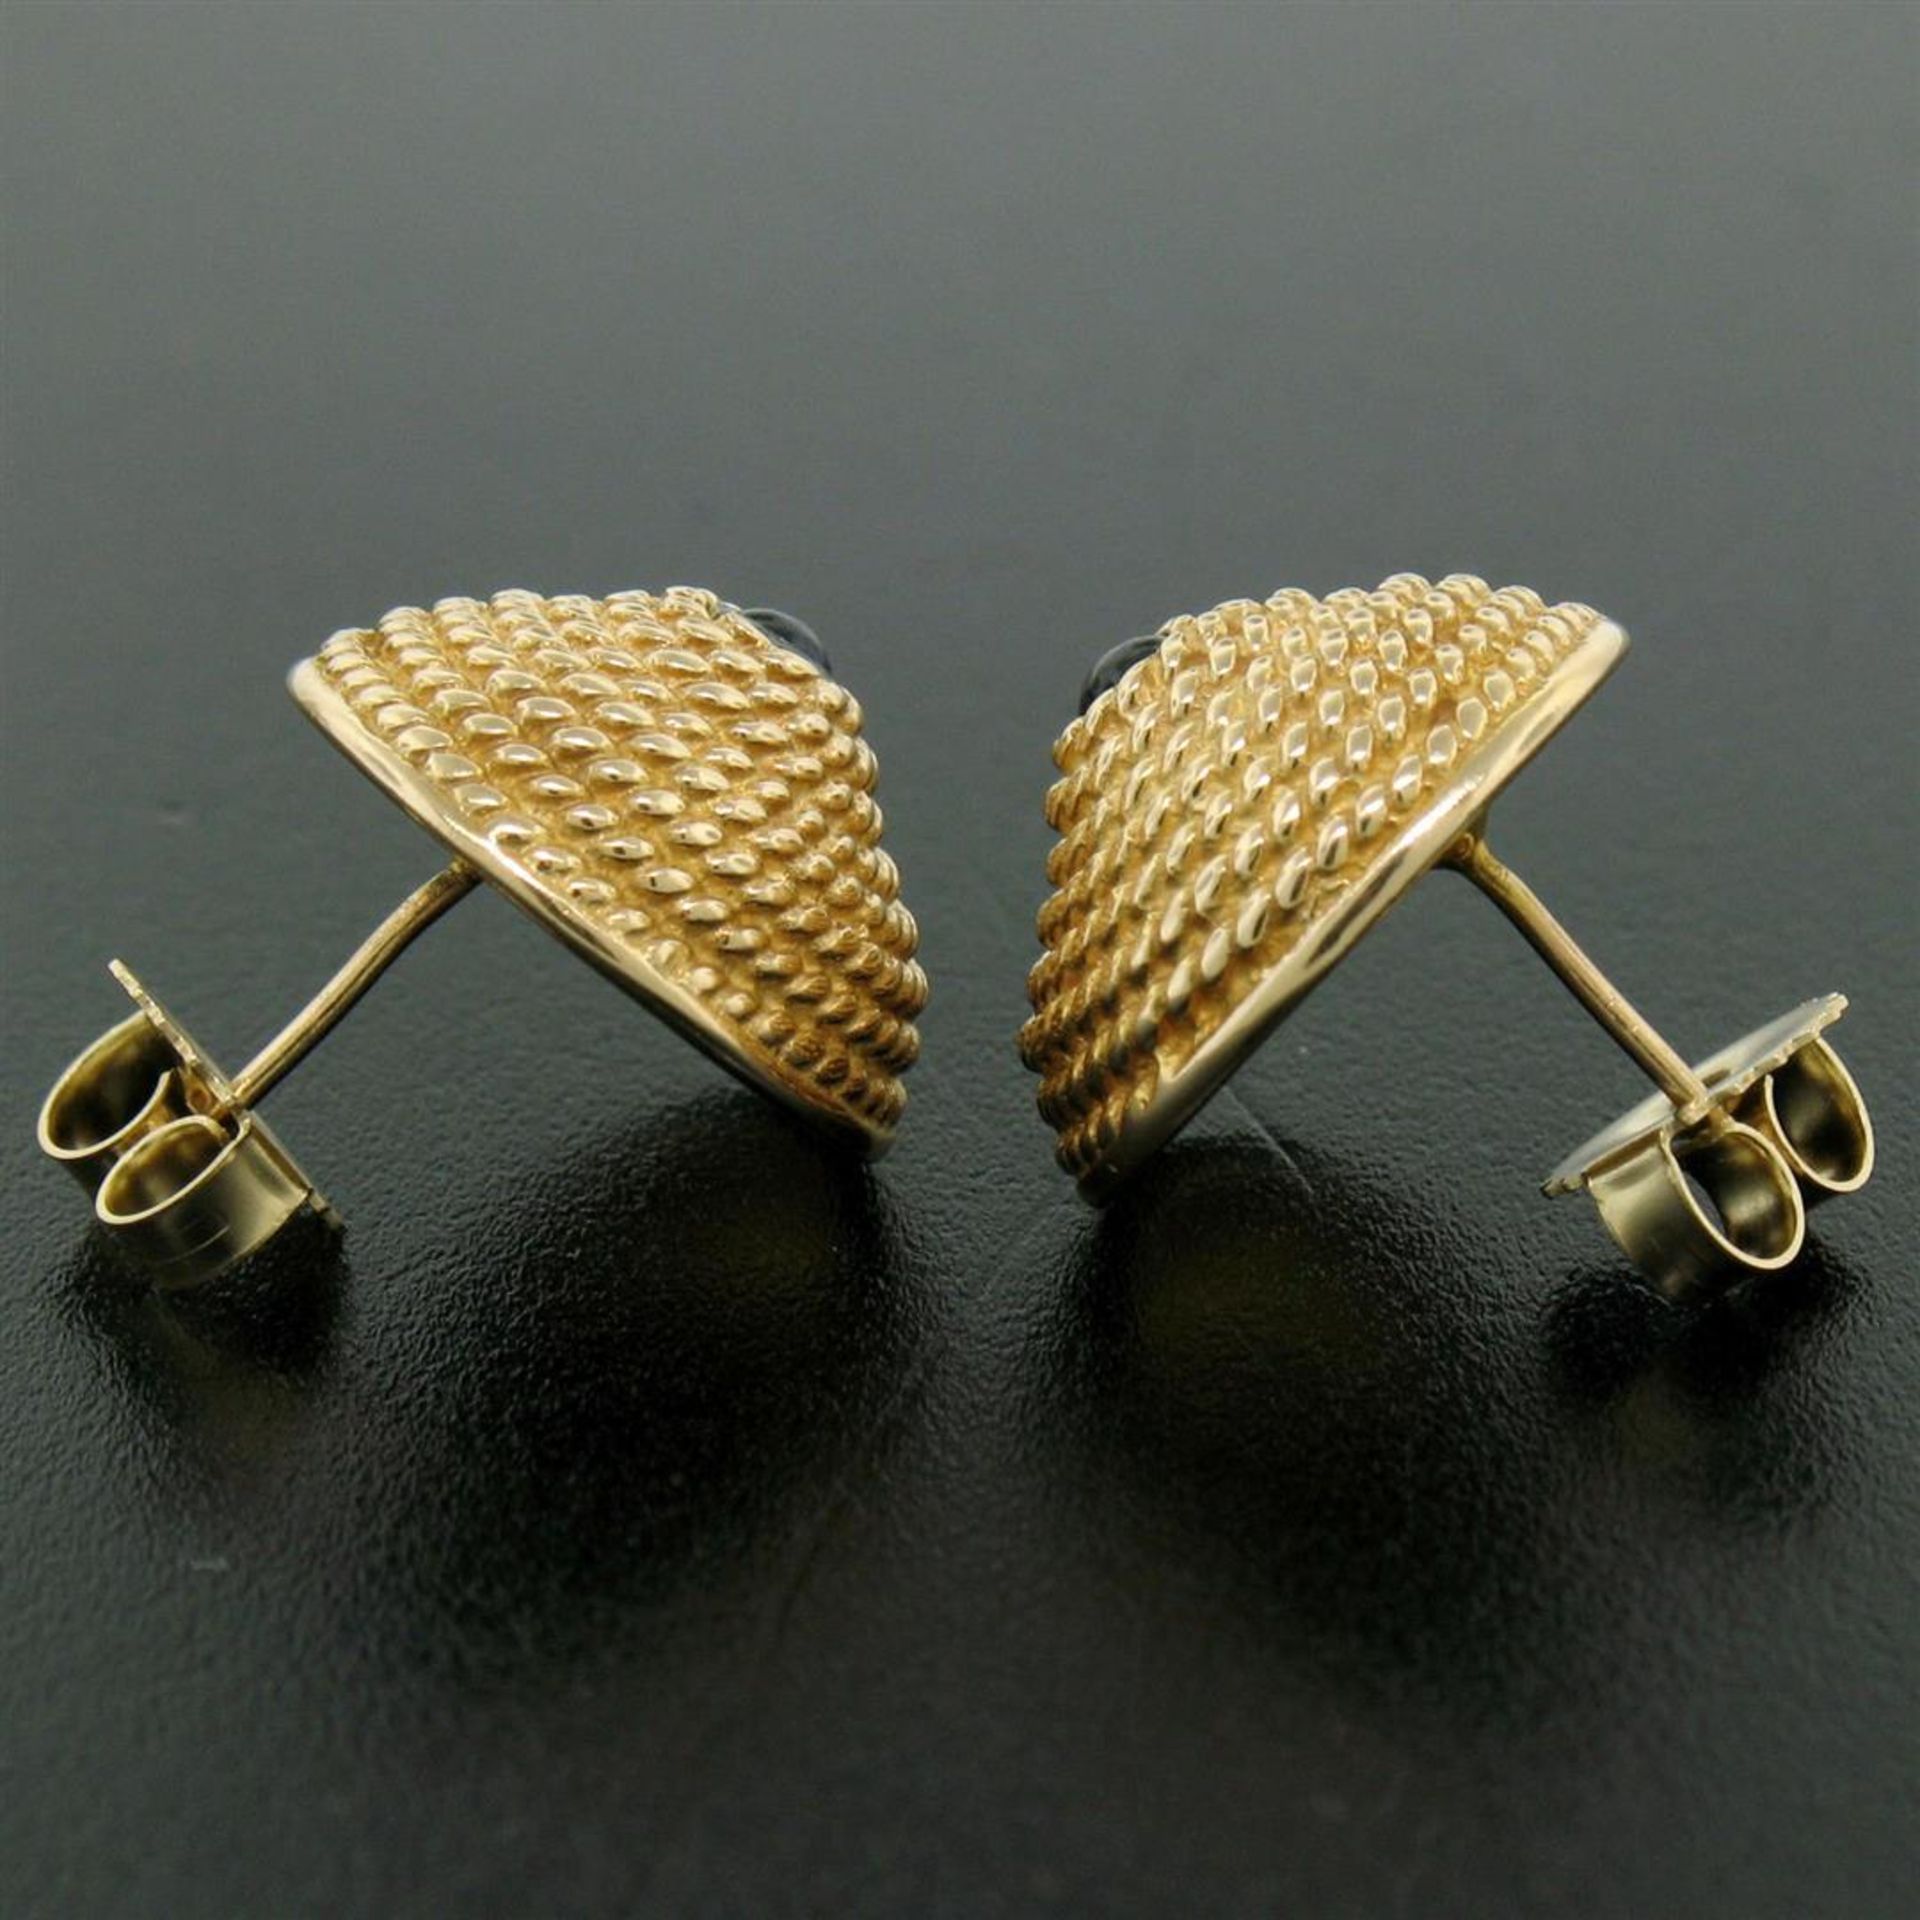 Vintage 14k Yellow Gold Cabochon Sapphire Twisted Wire Cone Shaped Stud Earrings - Image 6 of 7